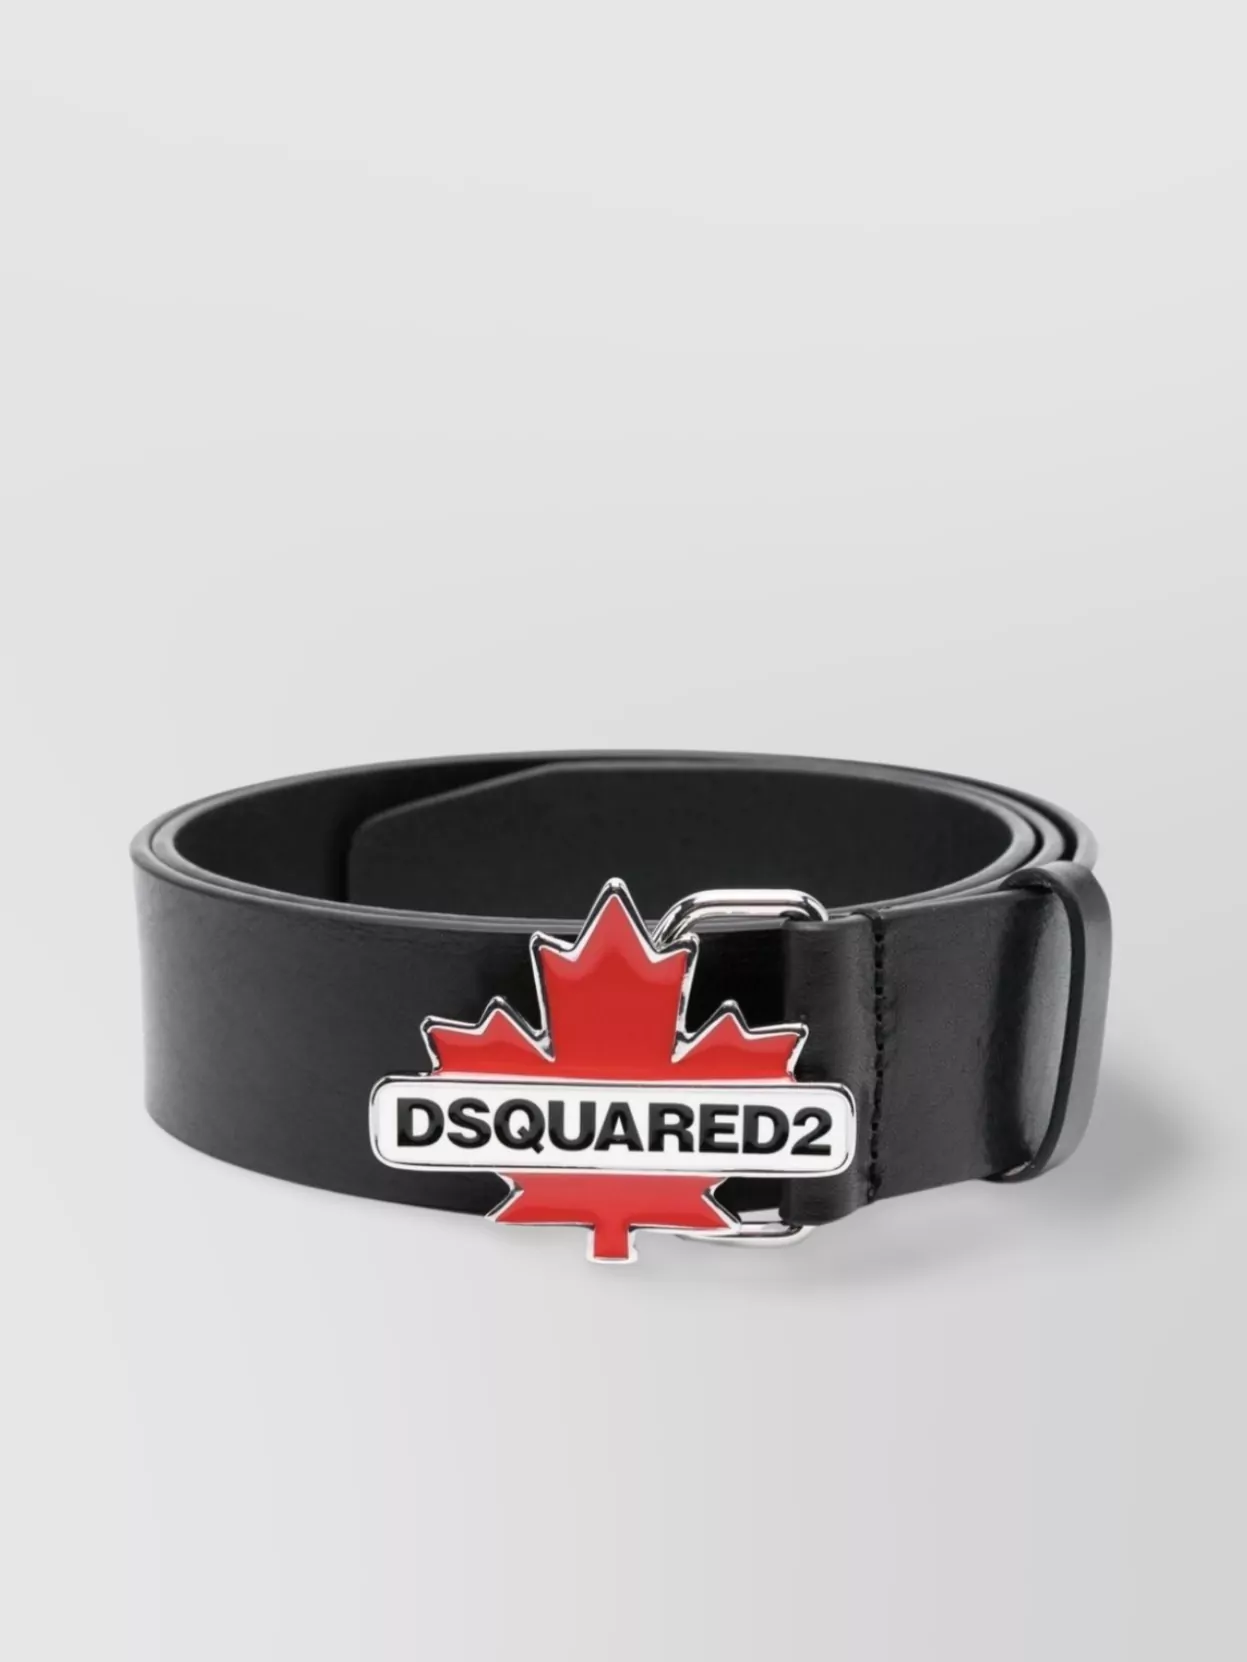 Shop Dsquared2 Leather Belt With Adjustable Fit And Metal Hardware